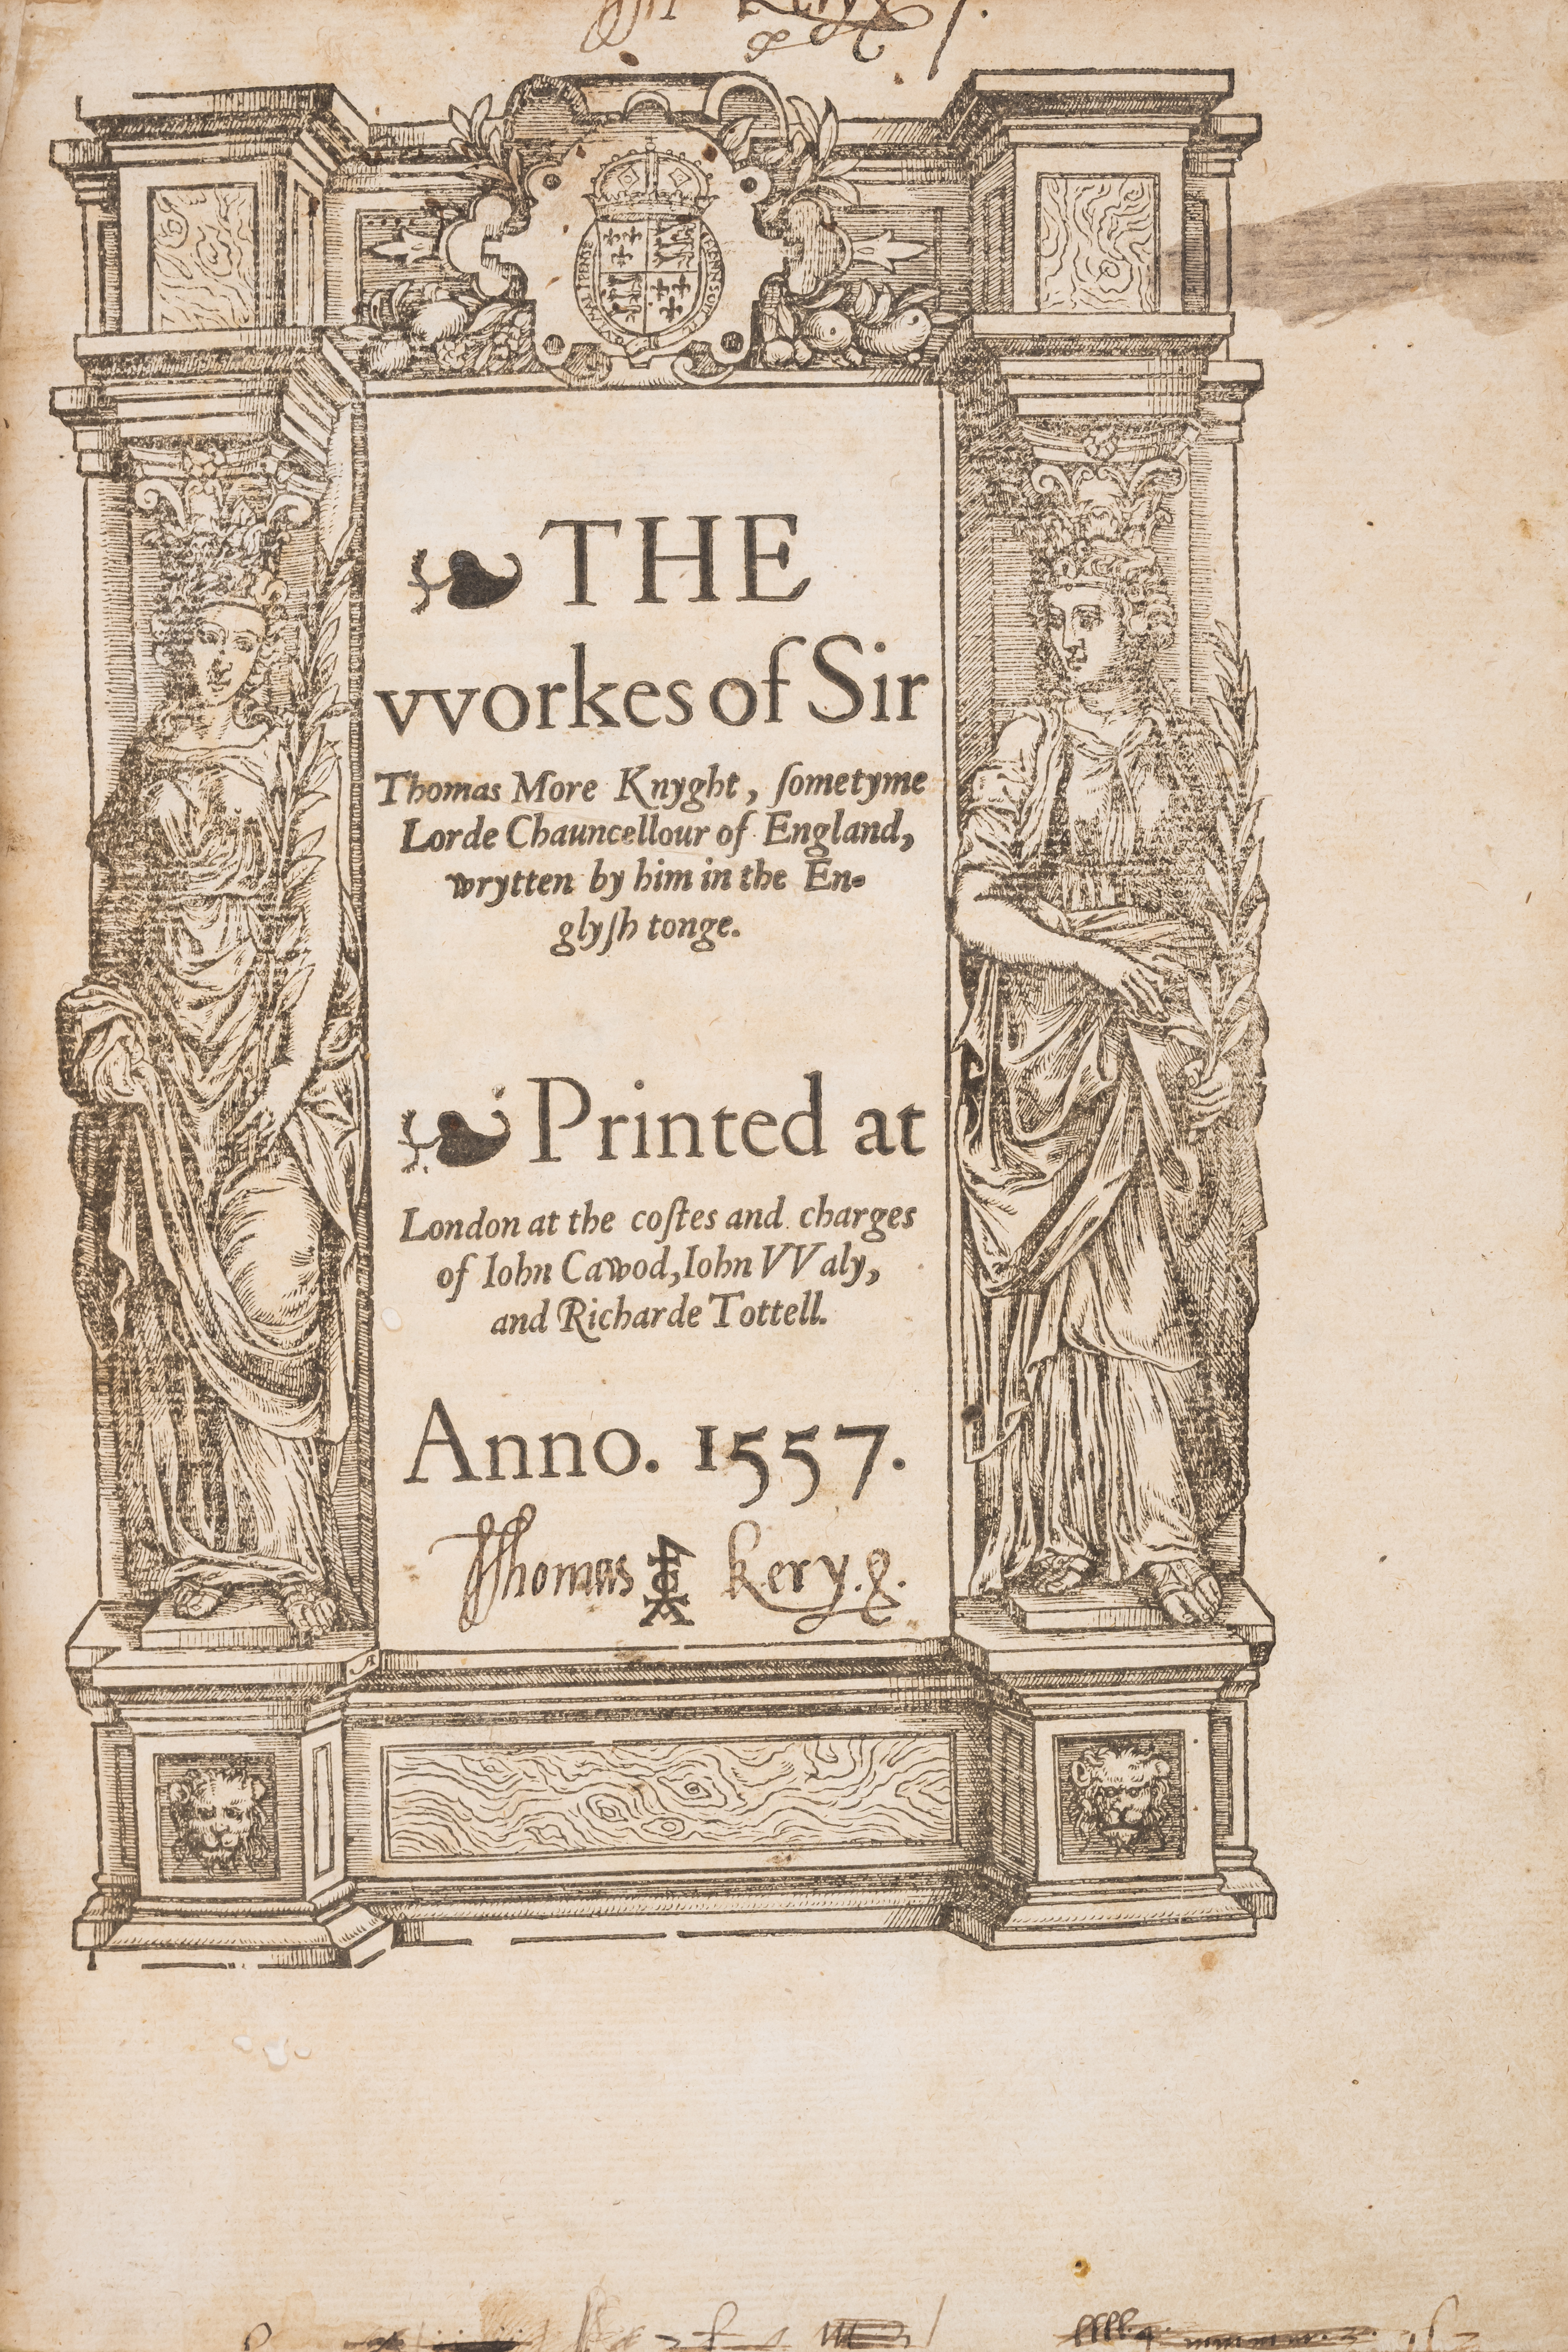 More (Sir Thomas, Saint) The Workes, first edition in English of the complete works, John Cawood,...